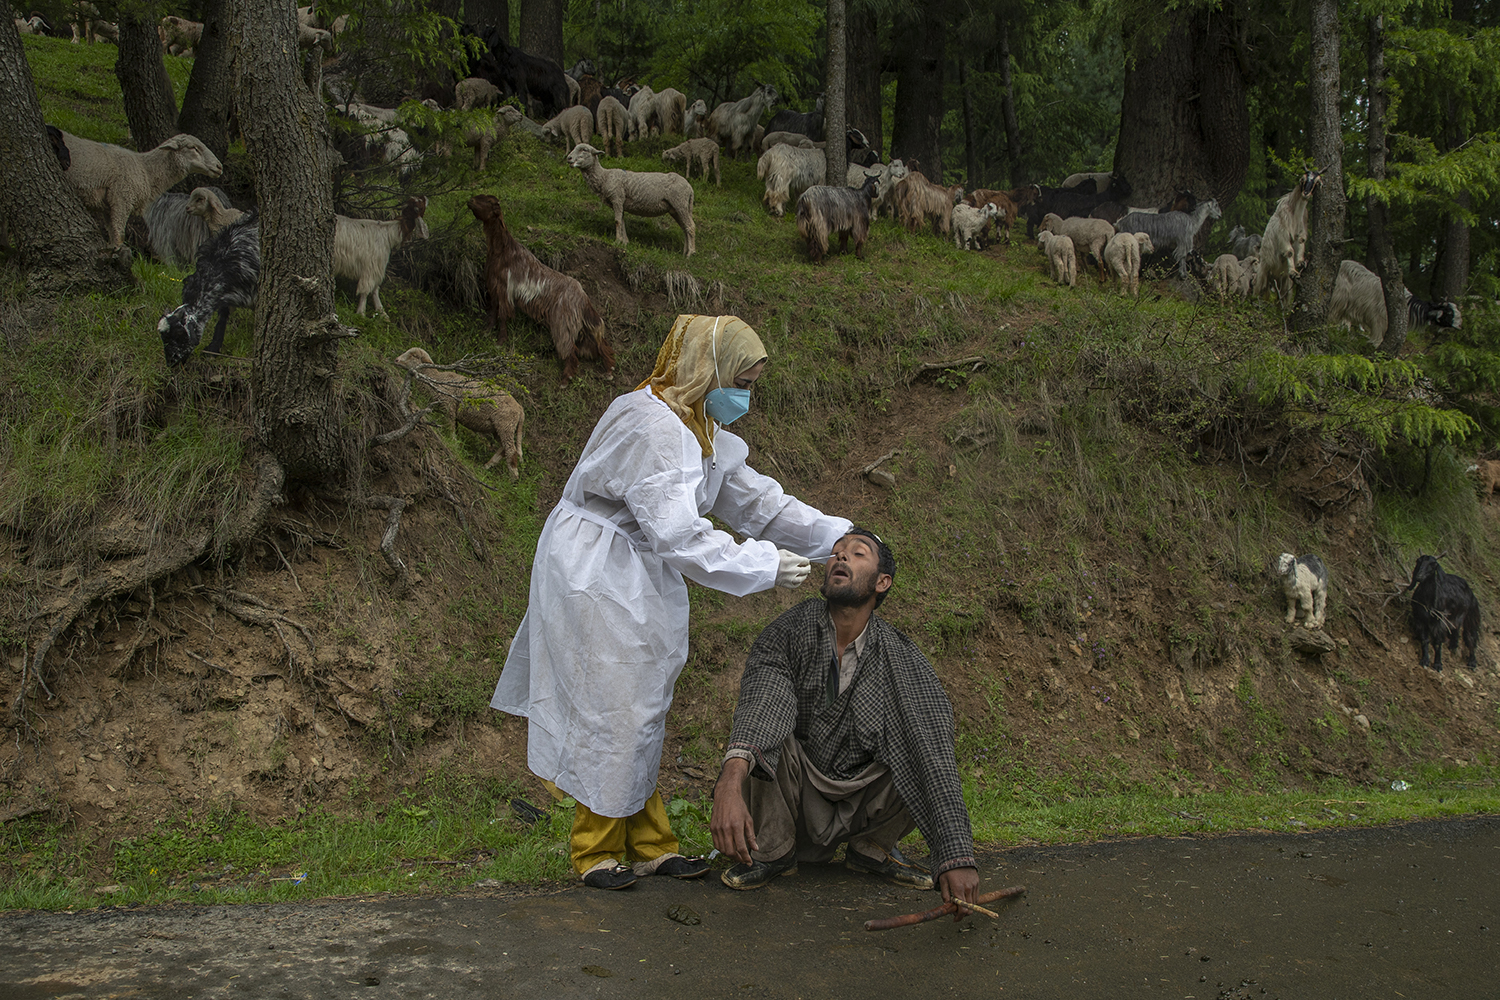 Kashmir’s ill-equipped health system and government’s push for tourism led to a COVID crisis